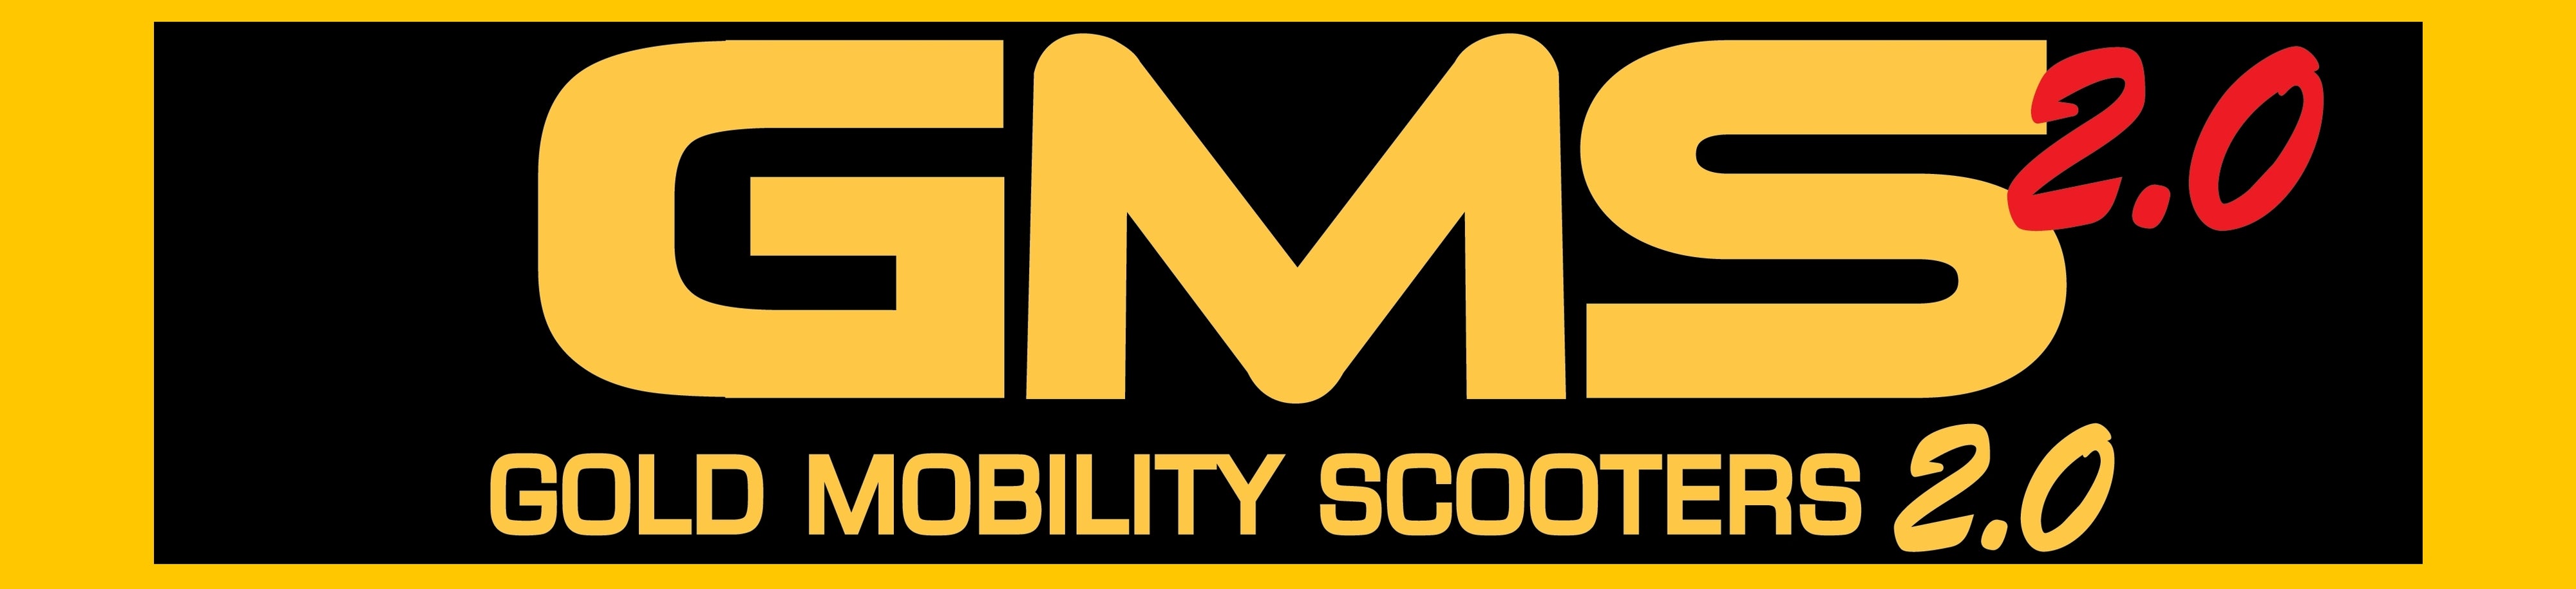 mobility scooter rentals near me